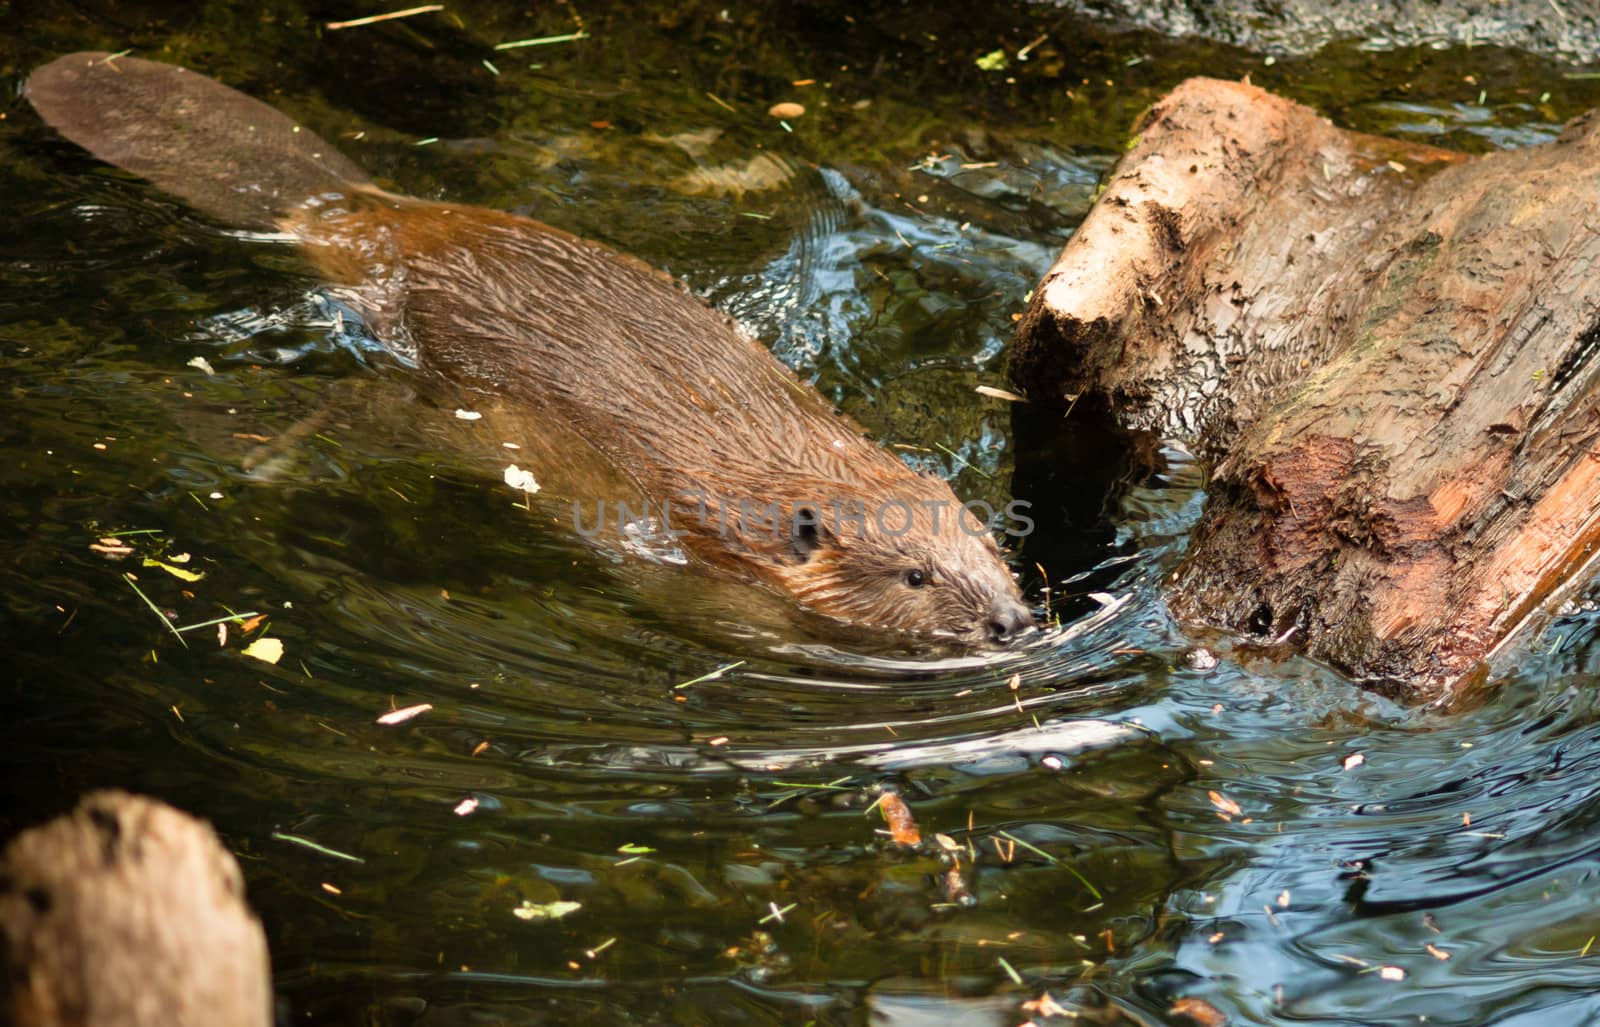 A Beaver swims around gathering wood for his lodge